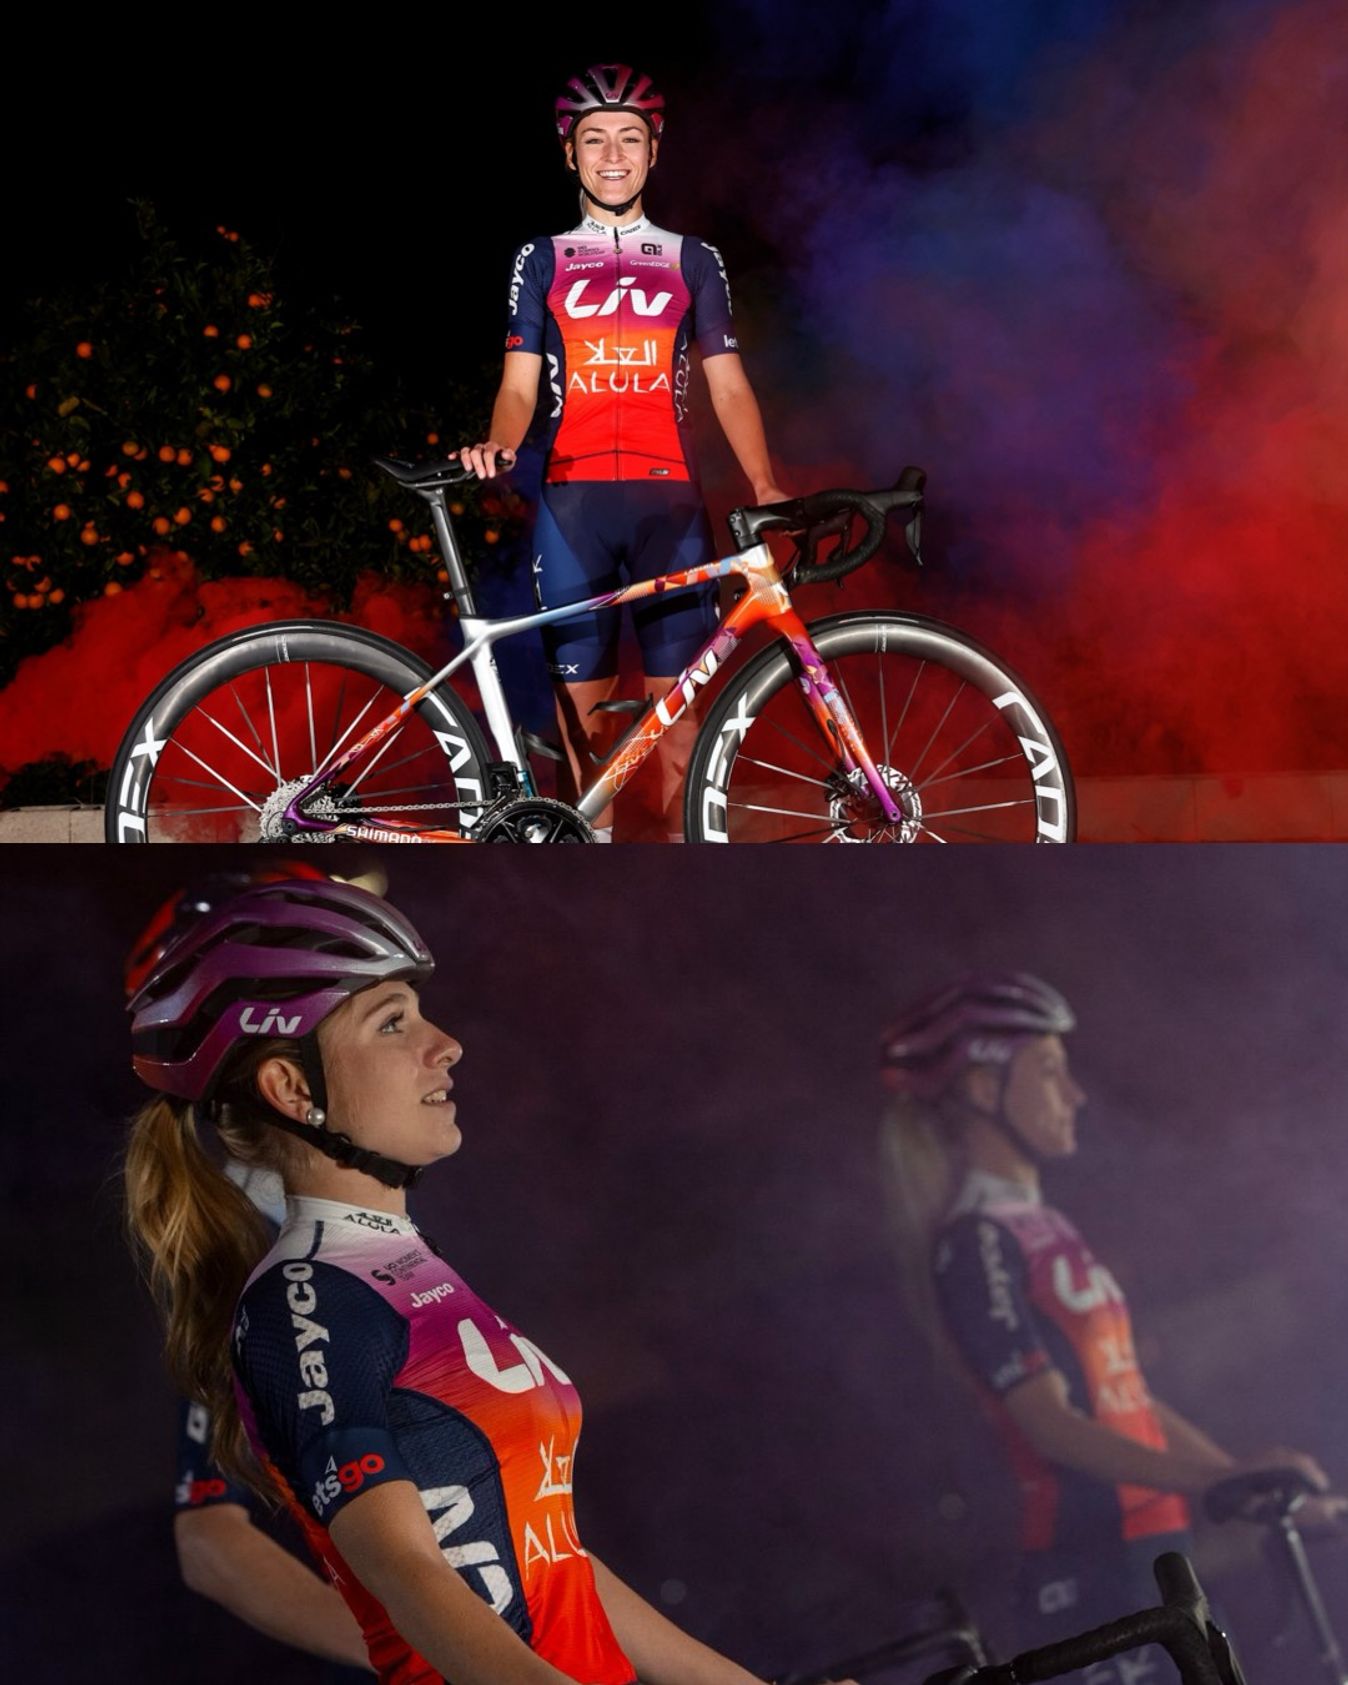 Liv AlUla Jayco's new kit was released on 1 January, alongside that of the men's team